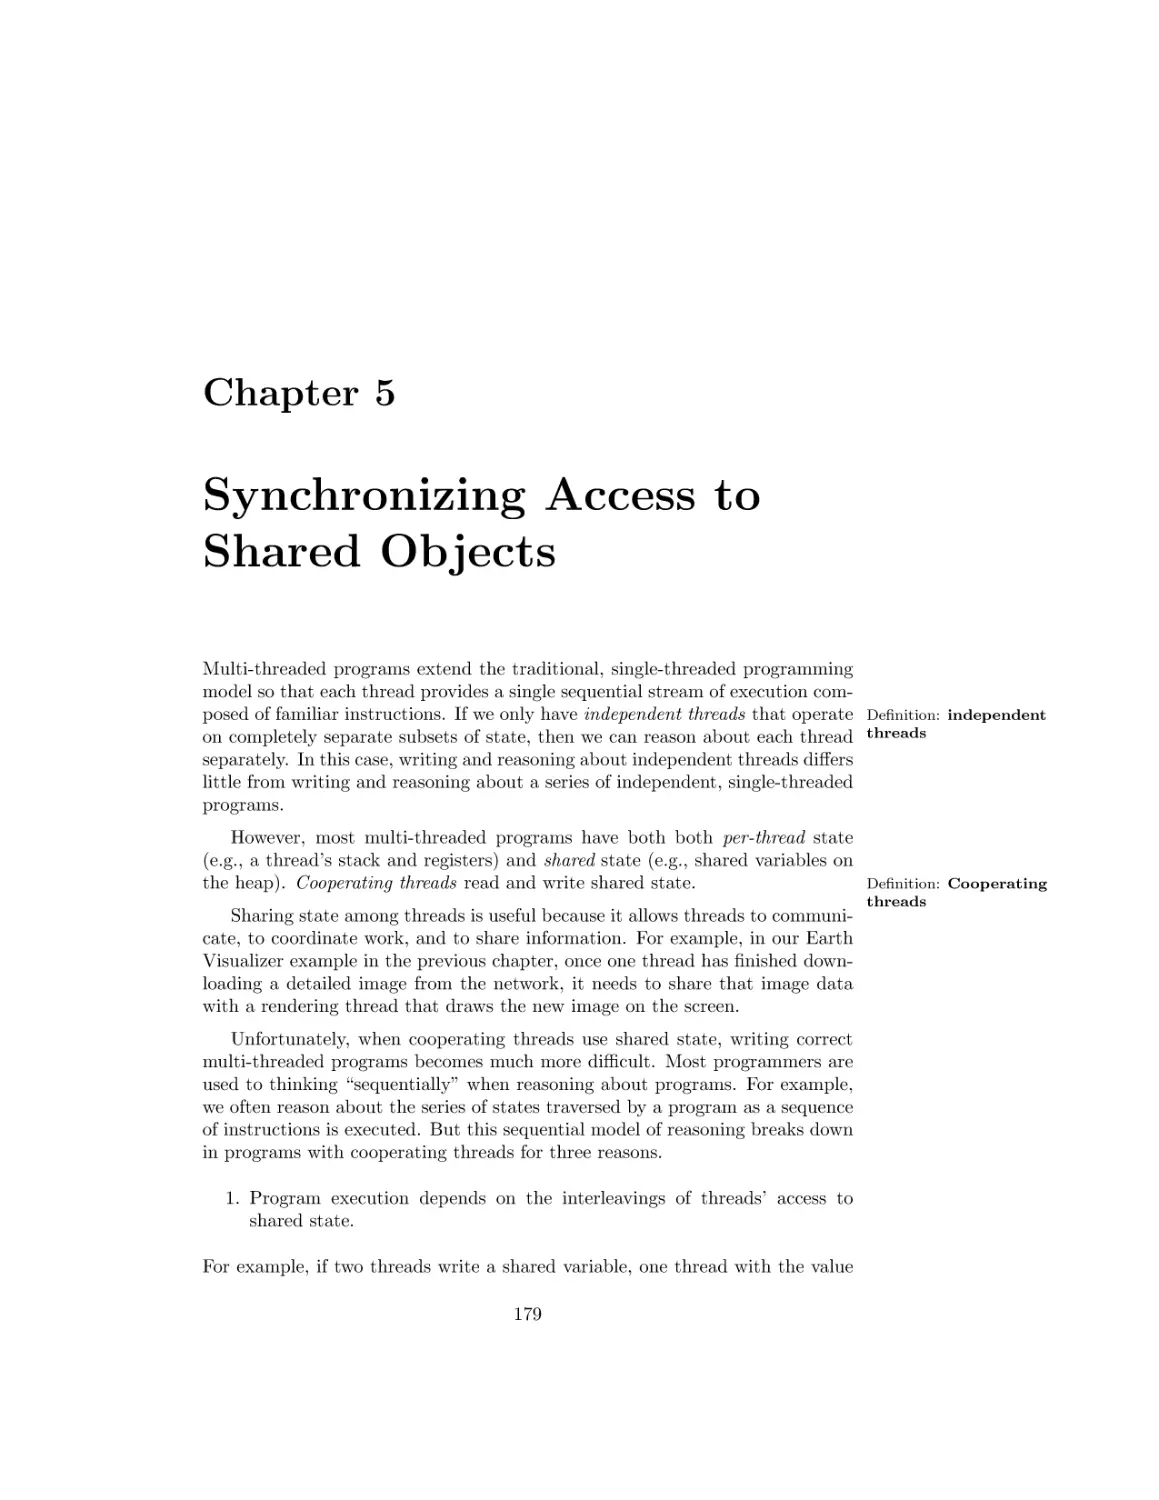 Synchronizing Access to Shared Objects